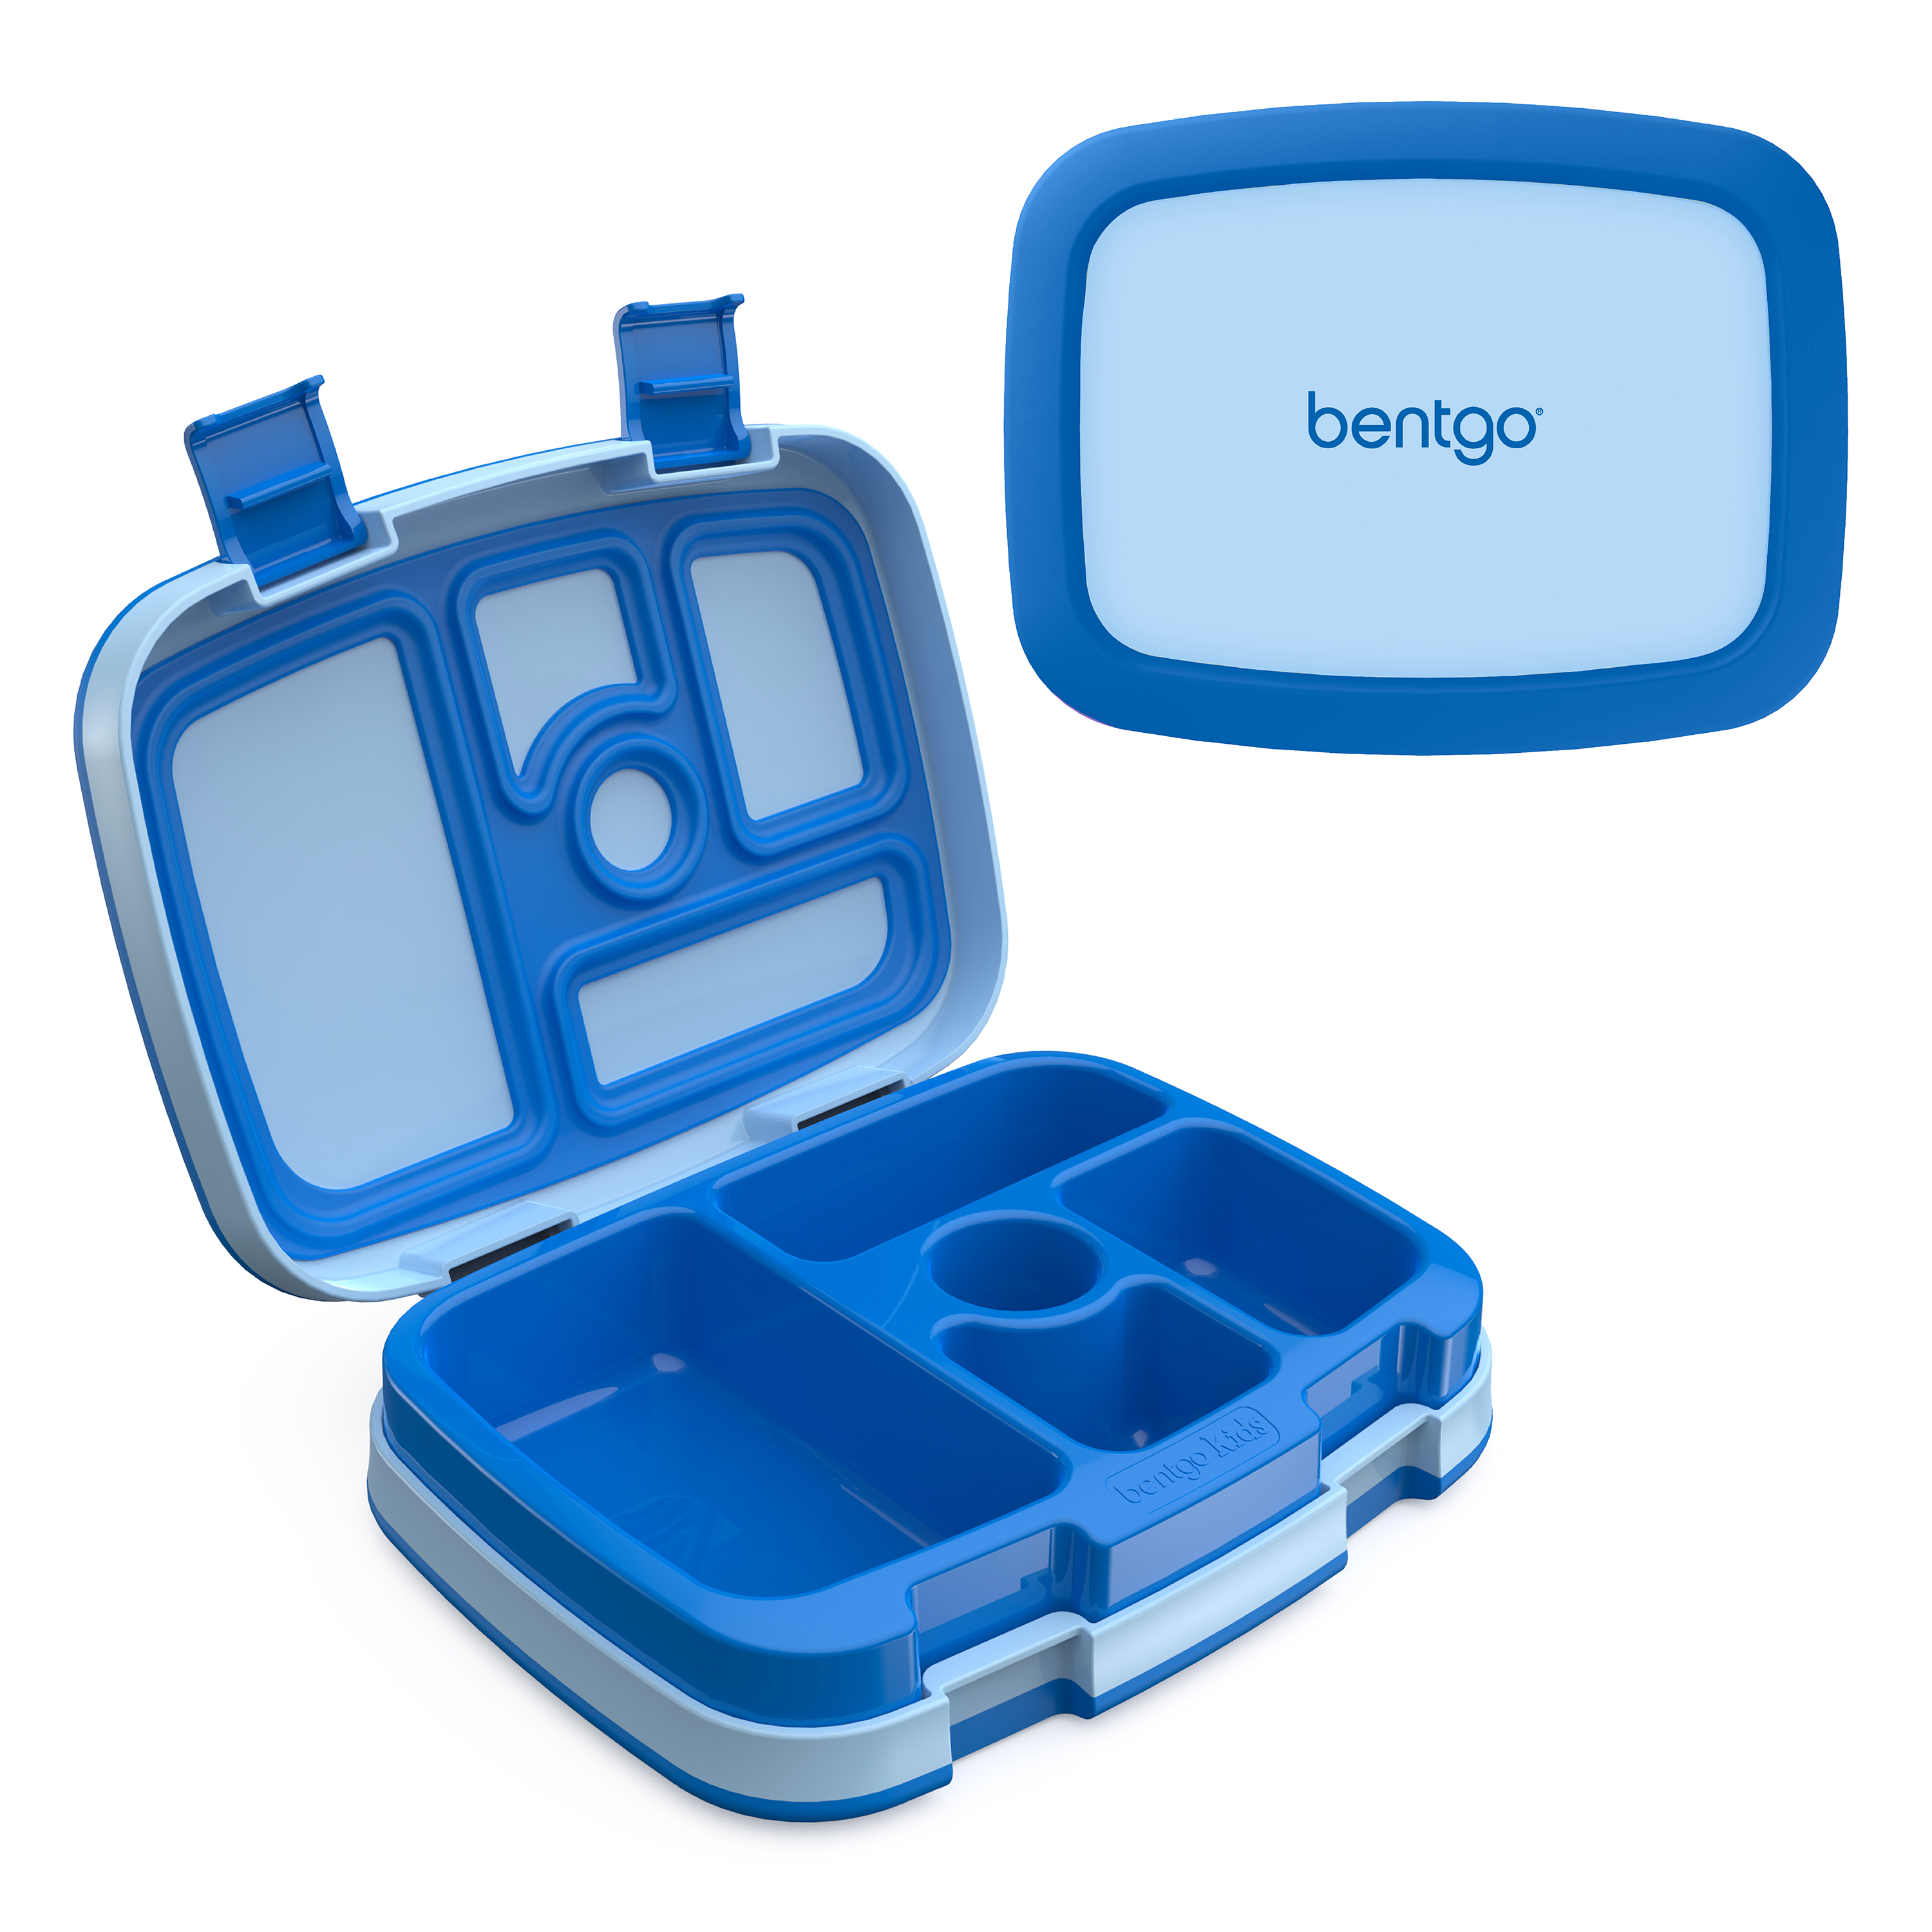 Bentgo Leak-Proof 5-Compartment Bento-Style Lunch Box, Kids, Blue - image 5 of 5